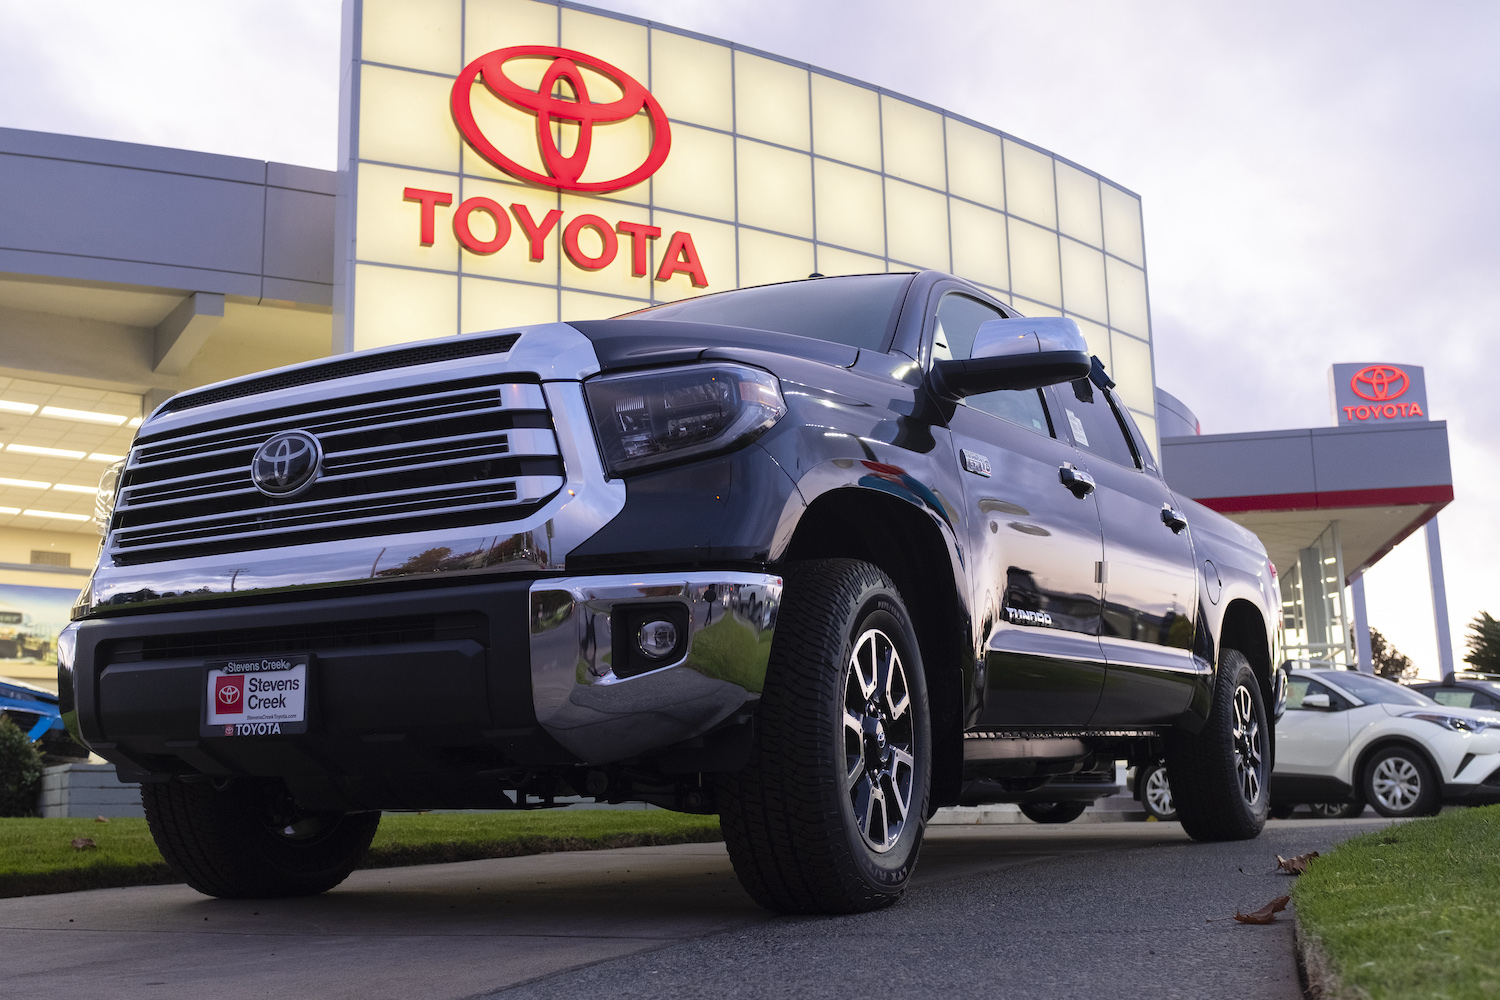 A white Toyota Tundra pickup truck is seen at a car dealership in San Jose, California.